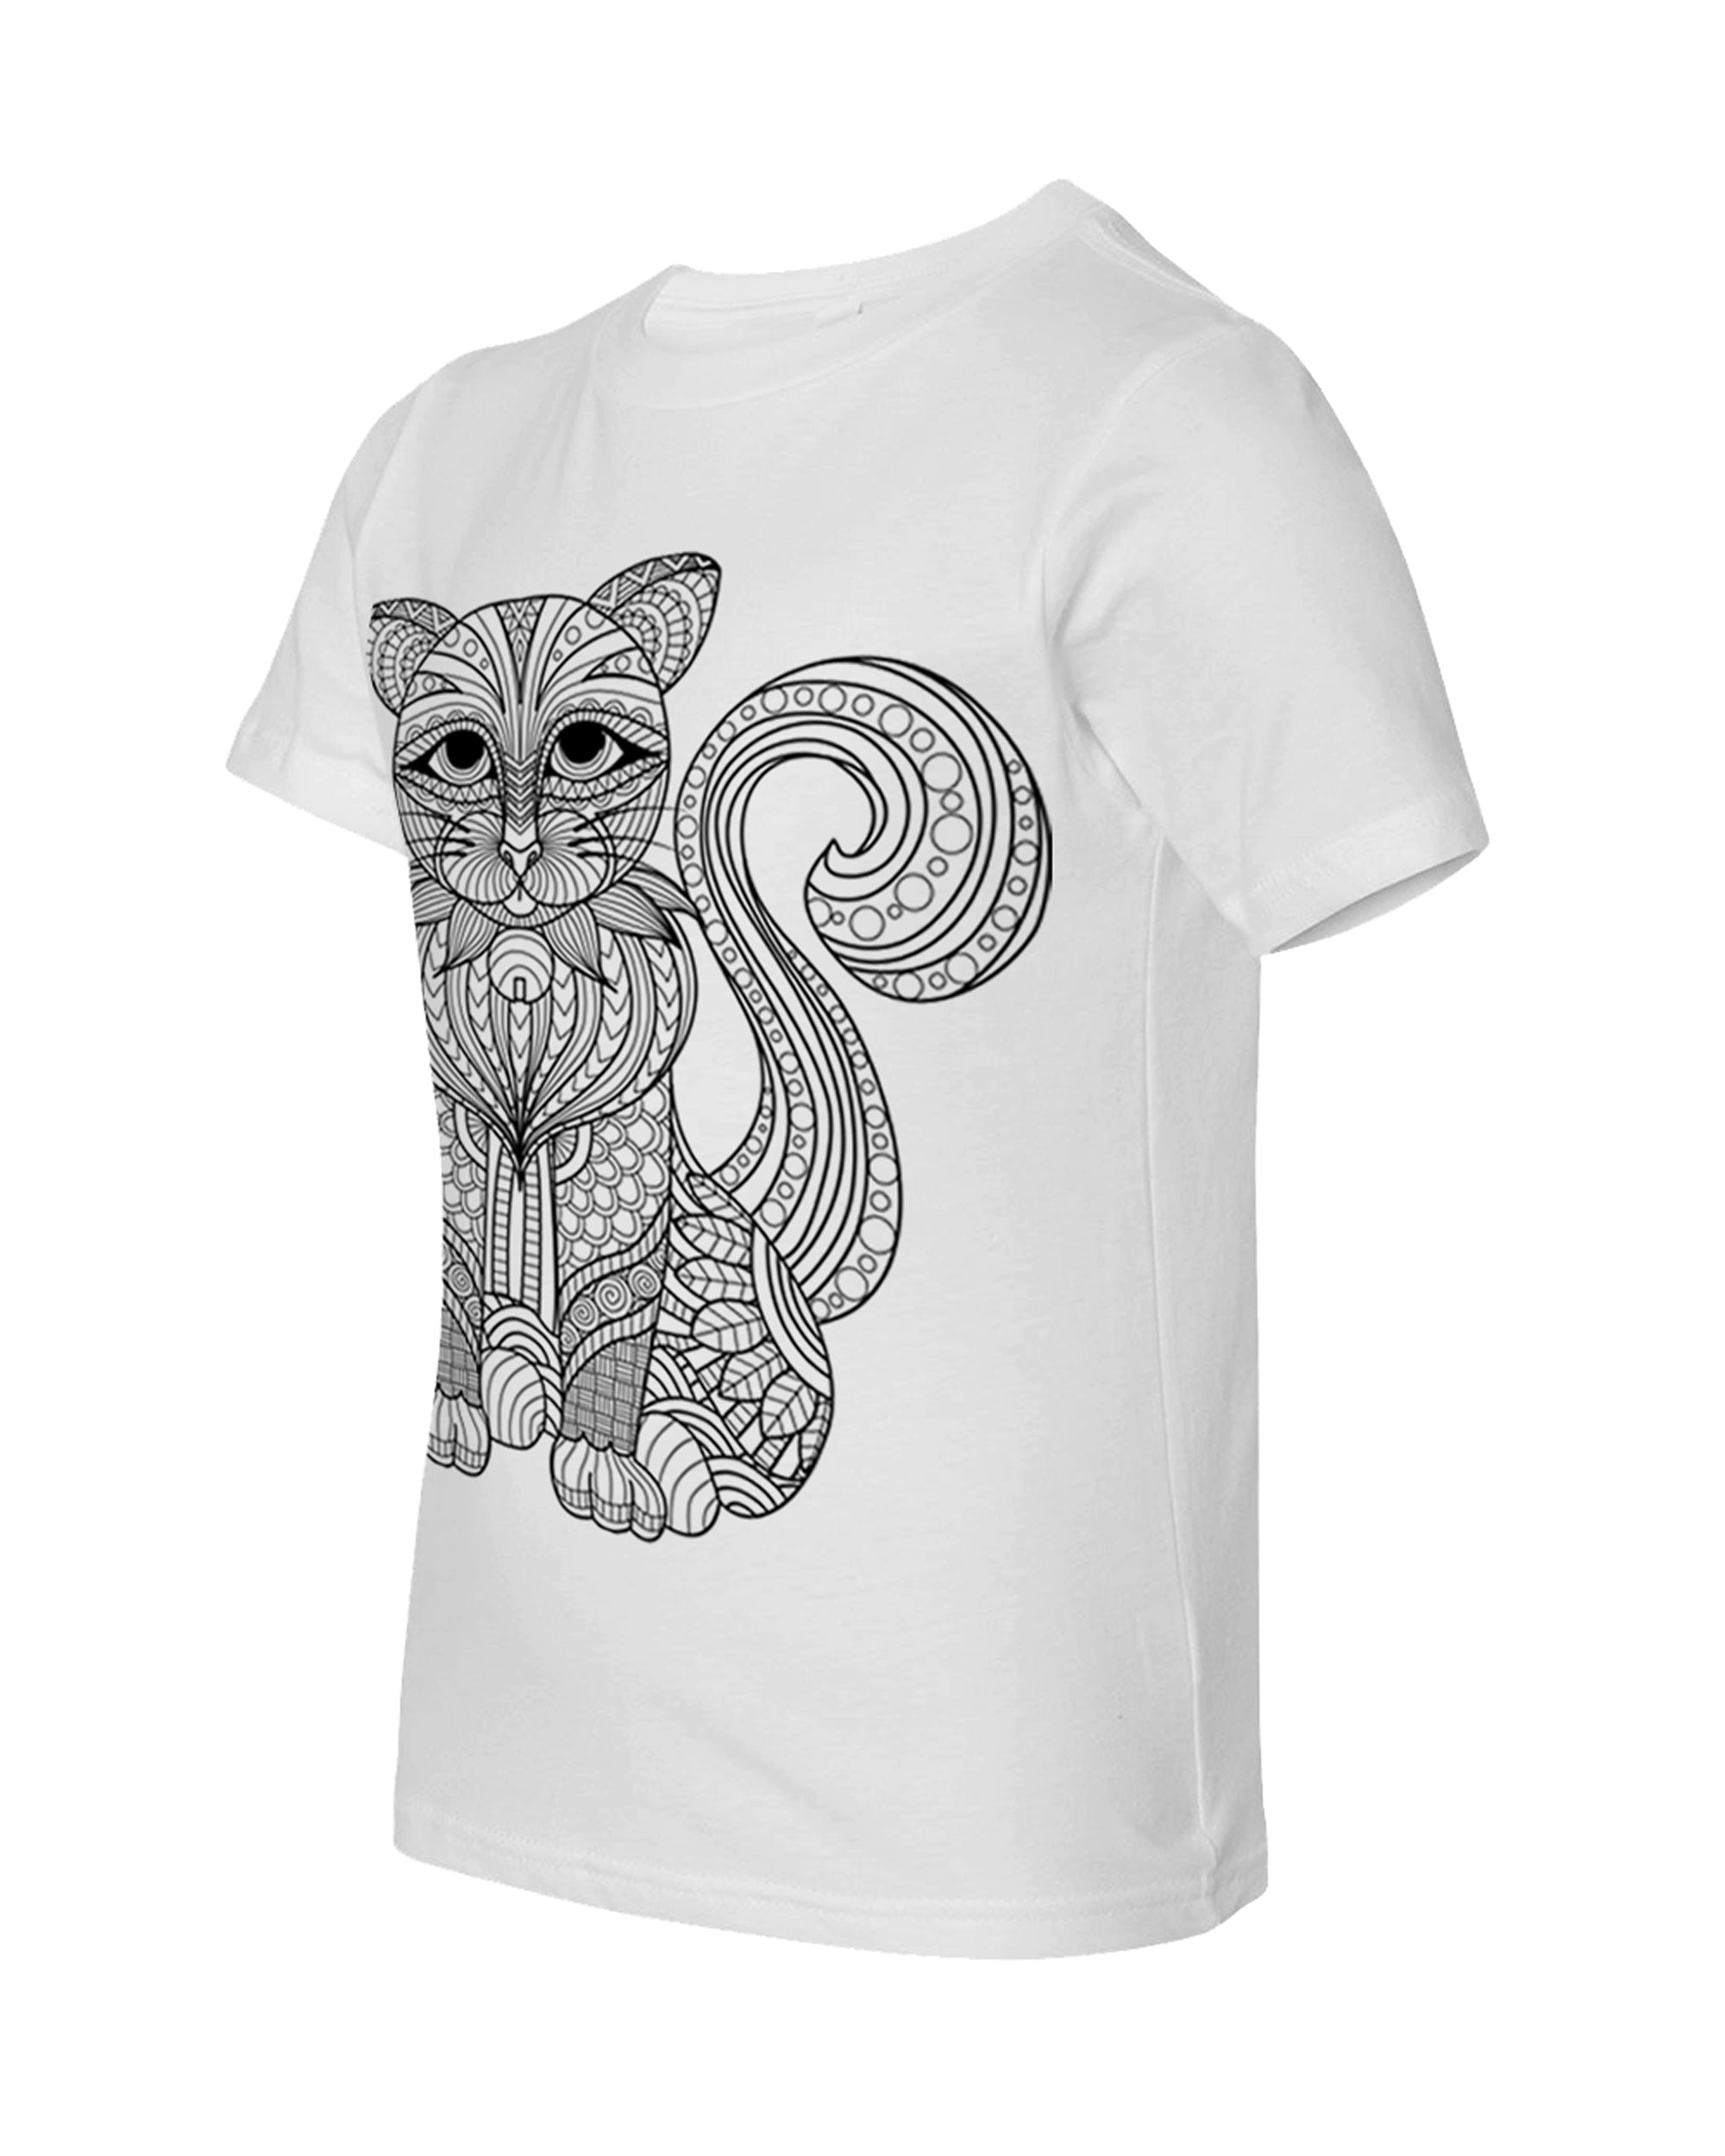 Kid's Coloring Cat White T Shirt - Adorned By You